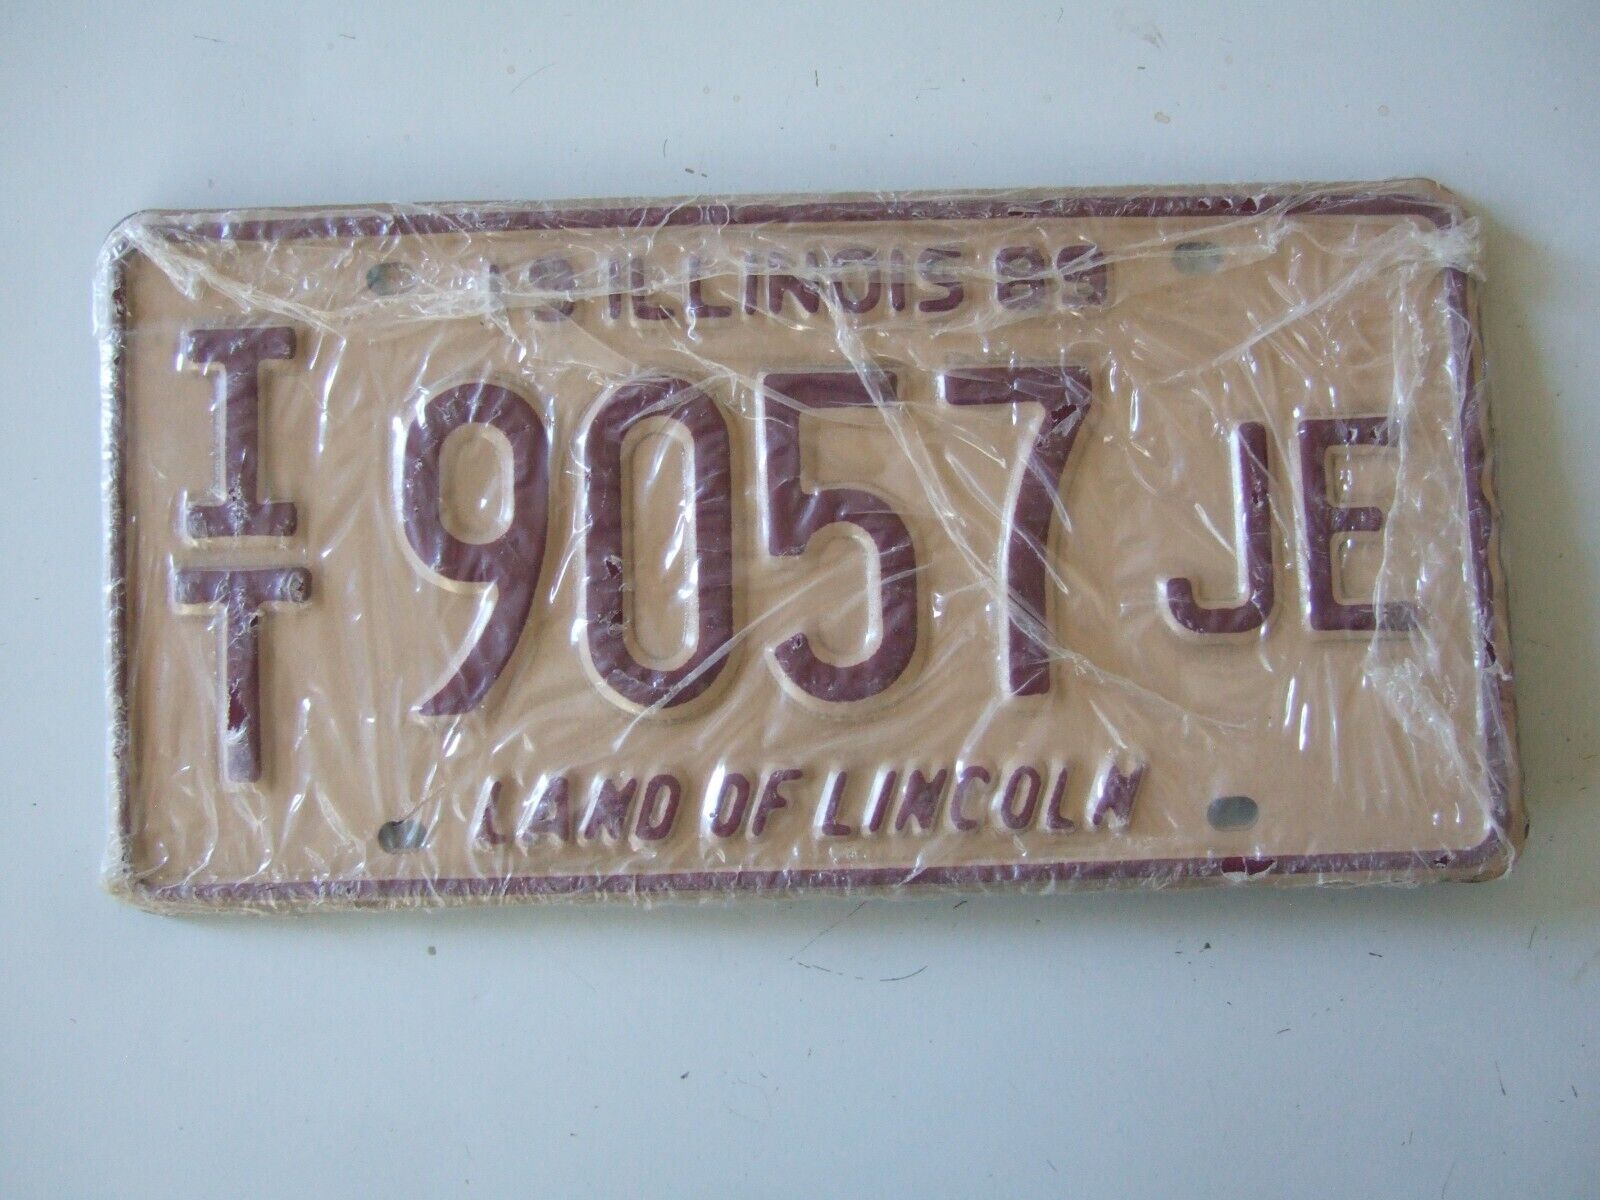 NEW  1989  ILLINOIS IN-TRANSIT VEHICLE LICENSE PLATE PAIR  ~ IT 9057 JE   SEALED